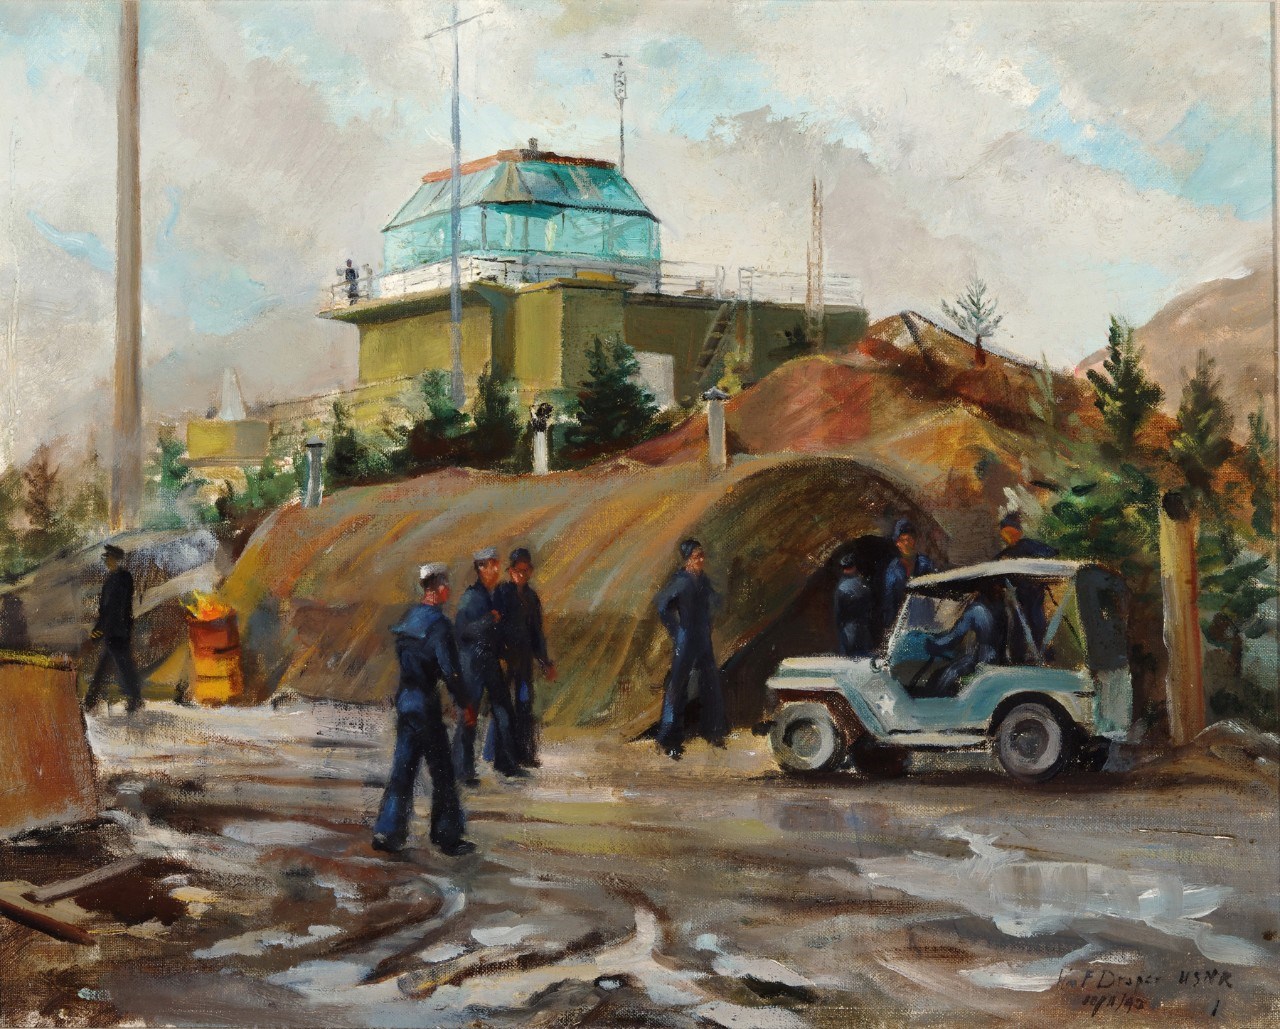 Colorful oil painting of glass control tower on a hill, with people and jeep below.